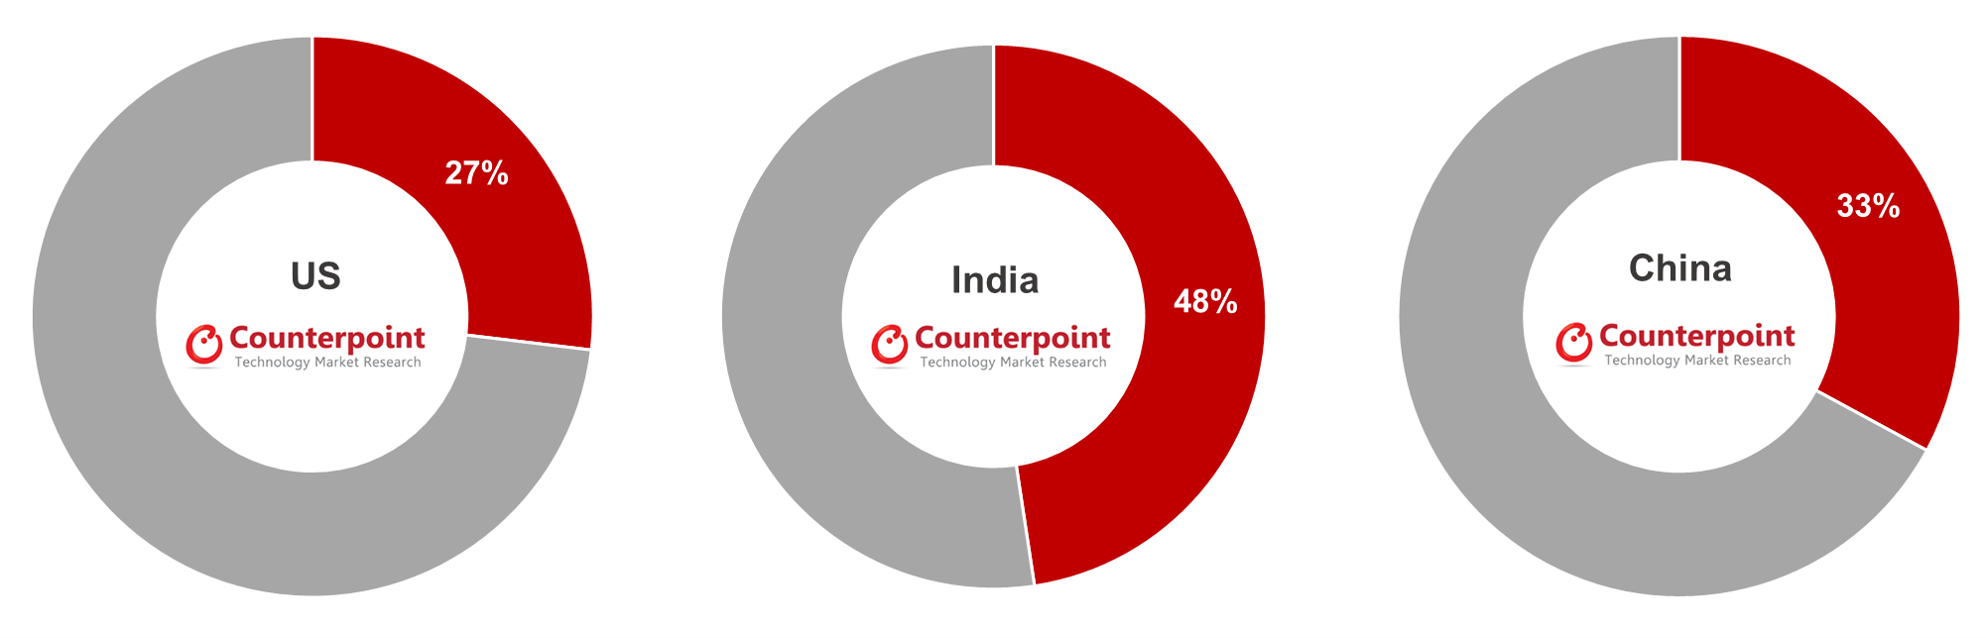 Counterpoint Research Share of Online Sales in US, India and China Smartphone Markets, H2 2020